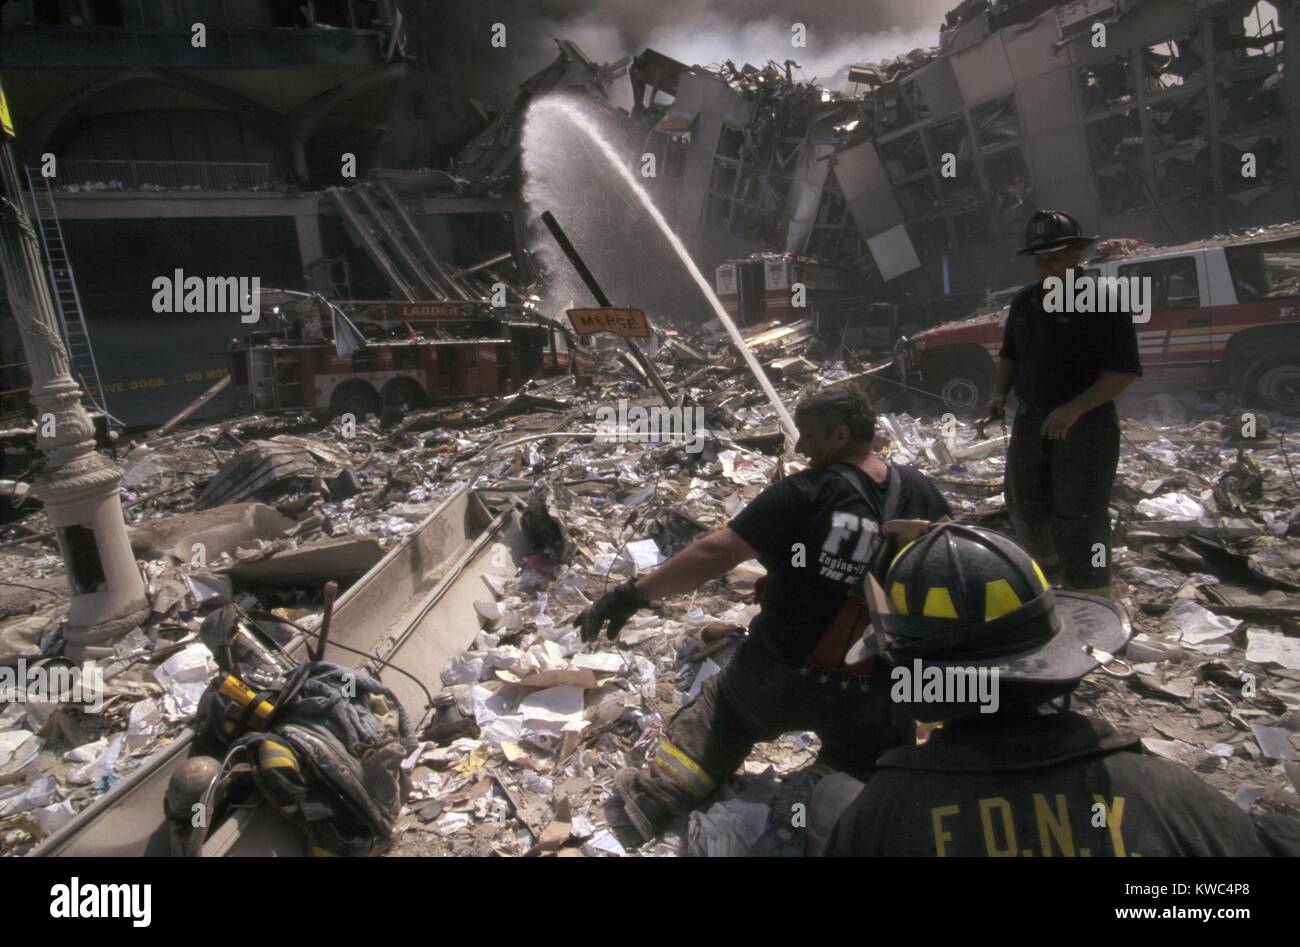 Fire fighters set up a hose amid smoking rubble following September 11th terrorist attack on World Trade Center. At left is still standing WTC 6. At right is the destroyed North pedestrian bridge over West Side Highway (West St.). The water stream is aimed in-between, toward the burning pile of the collapsed WTC1 (North Tower). New York City, Sept. 11, 2001. (BSLOC 2015 2 49) Stock Photo